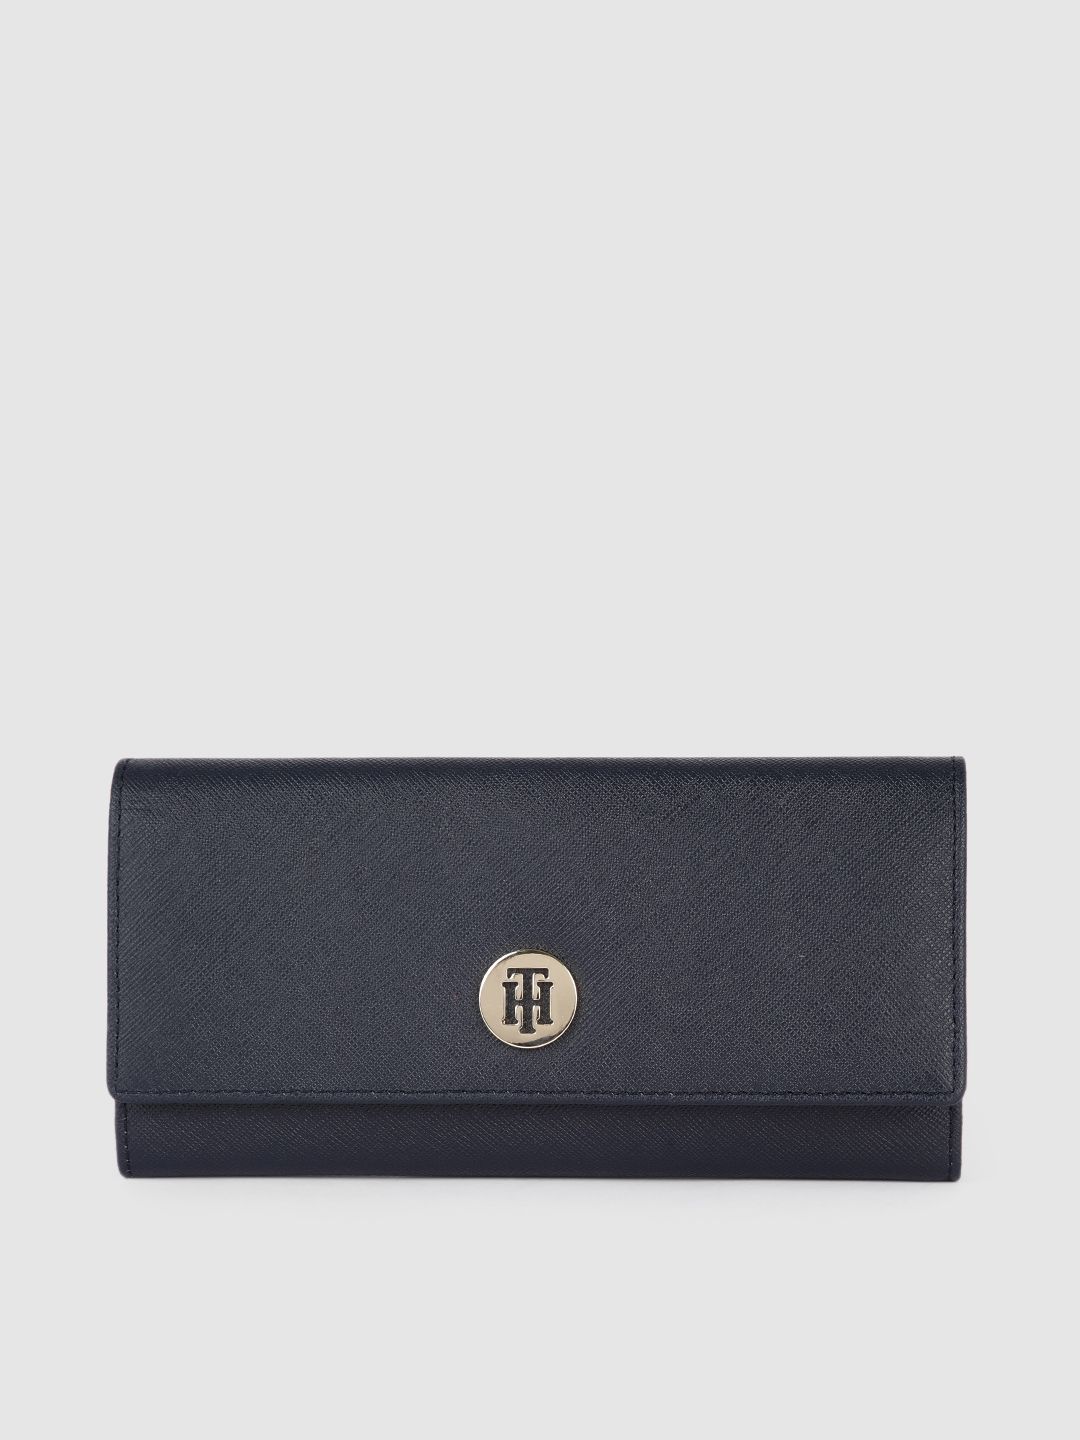 Tommy Hilfiger Women Navy Blue Leather Three Fold Wallet Price in India